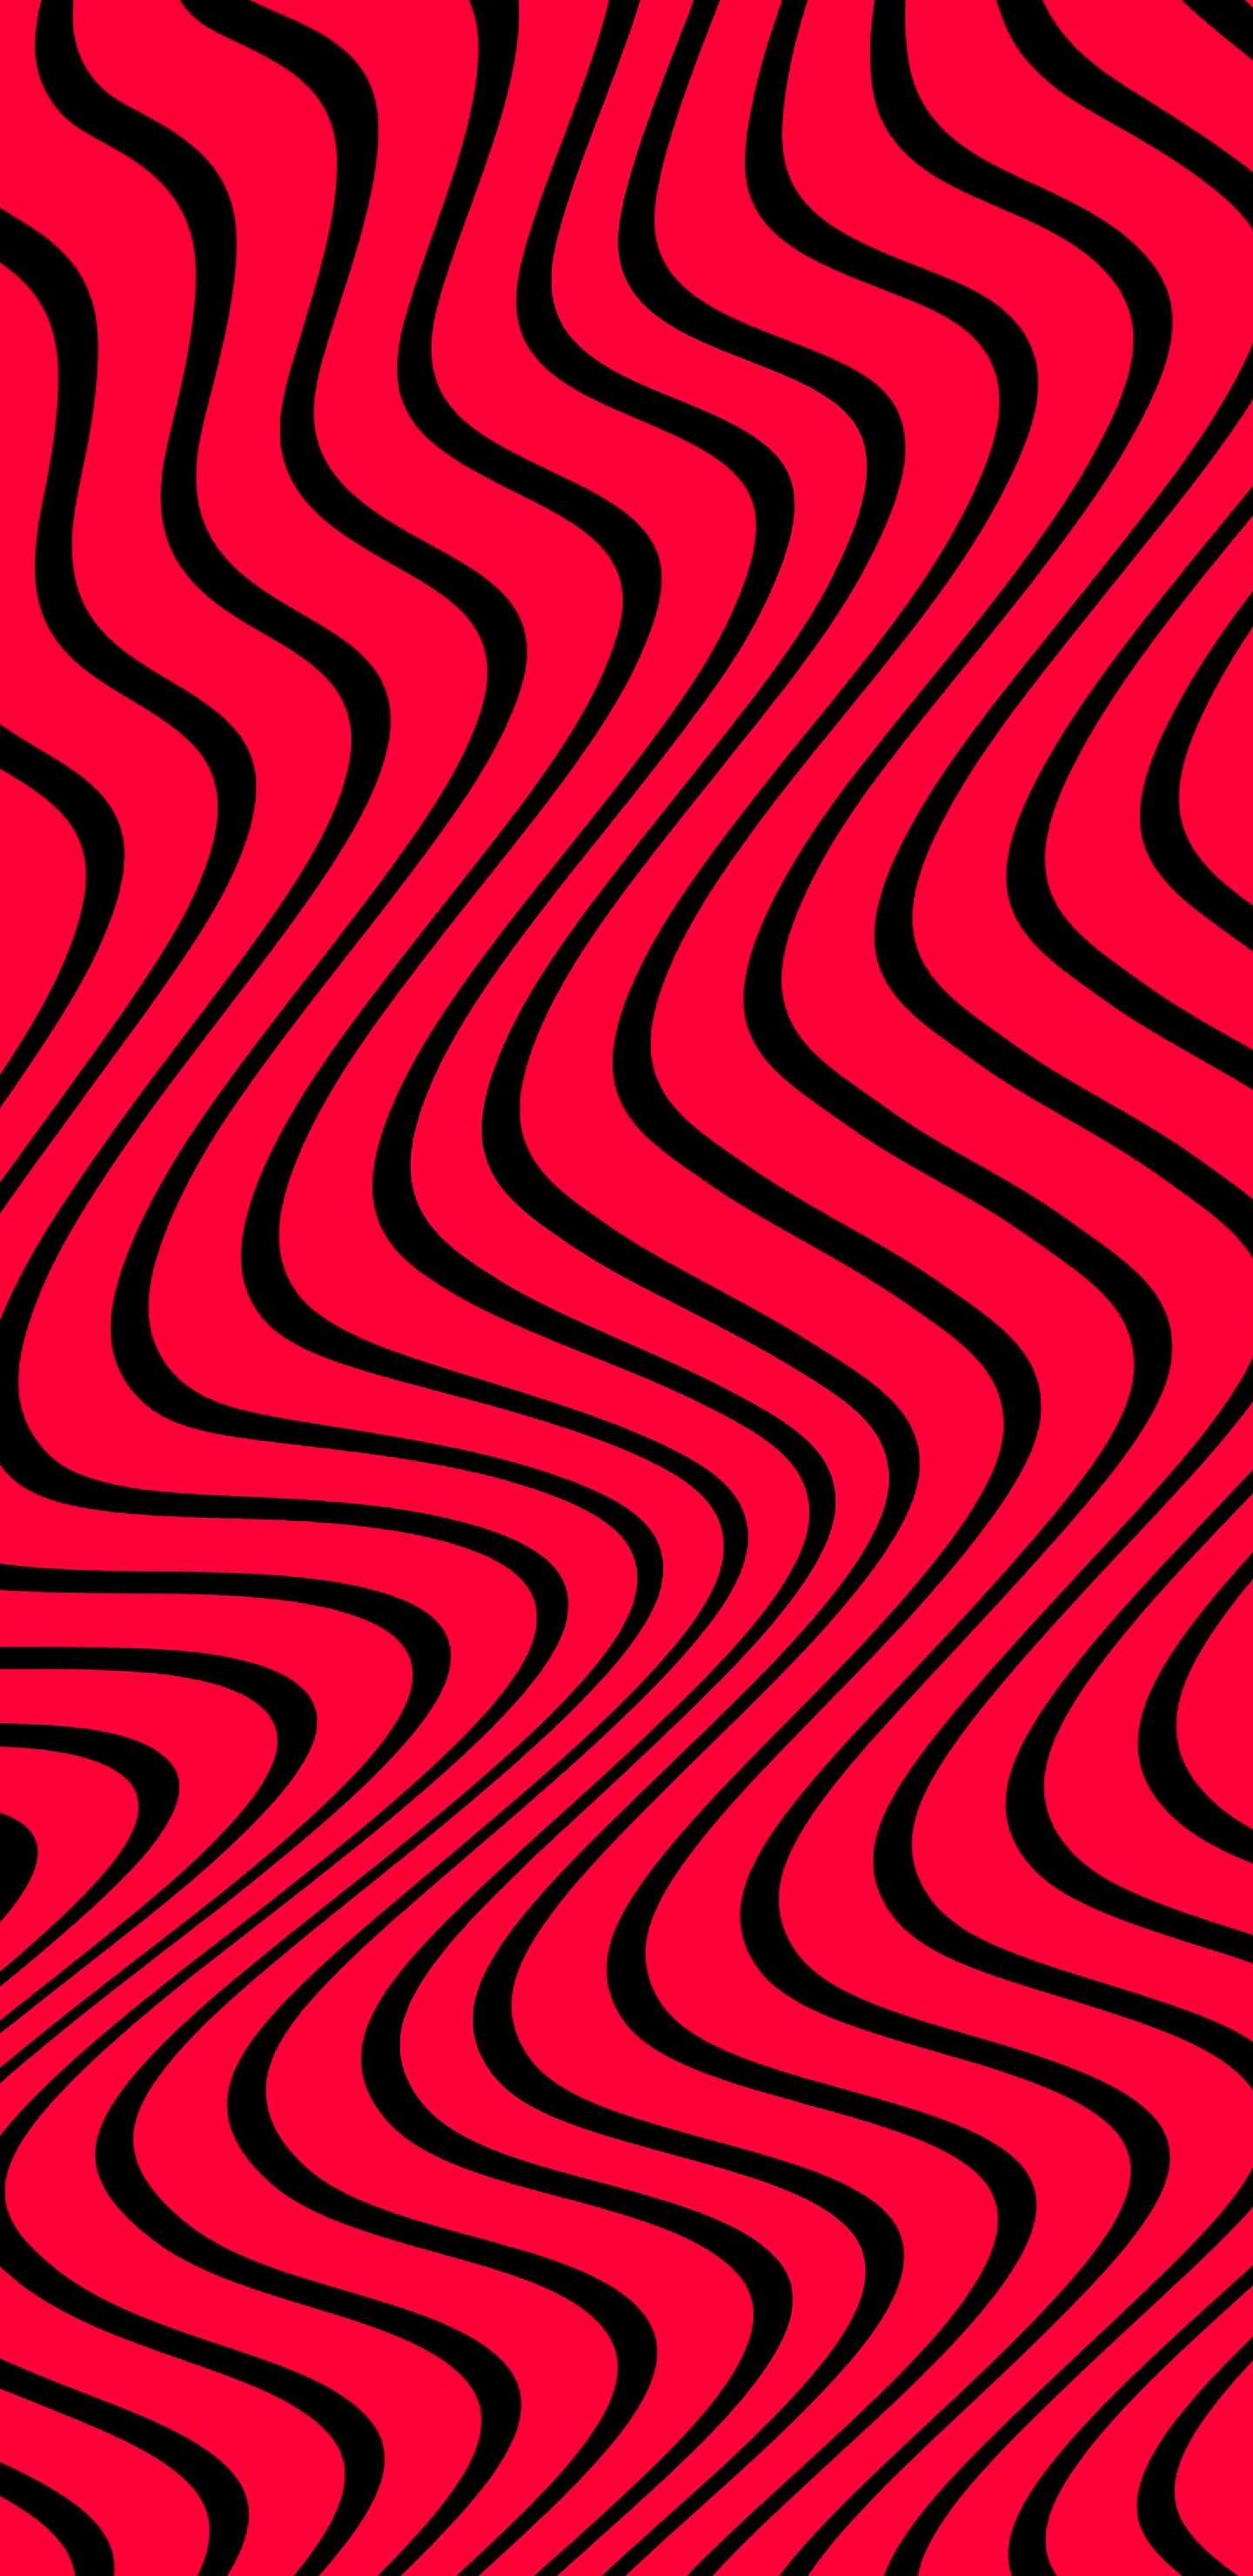 I Formatted The Pewdiepie Design To Fit As A Phone Wallpaper